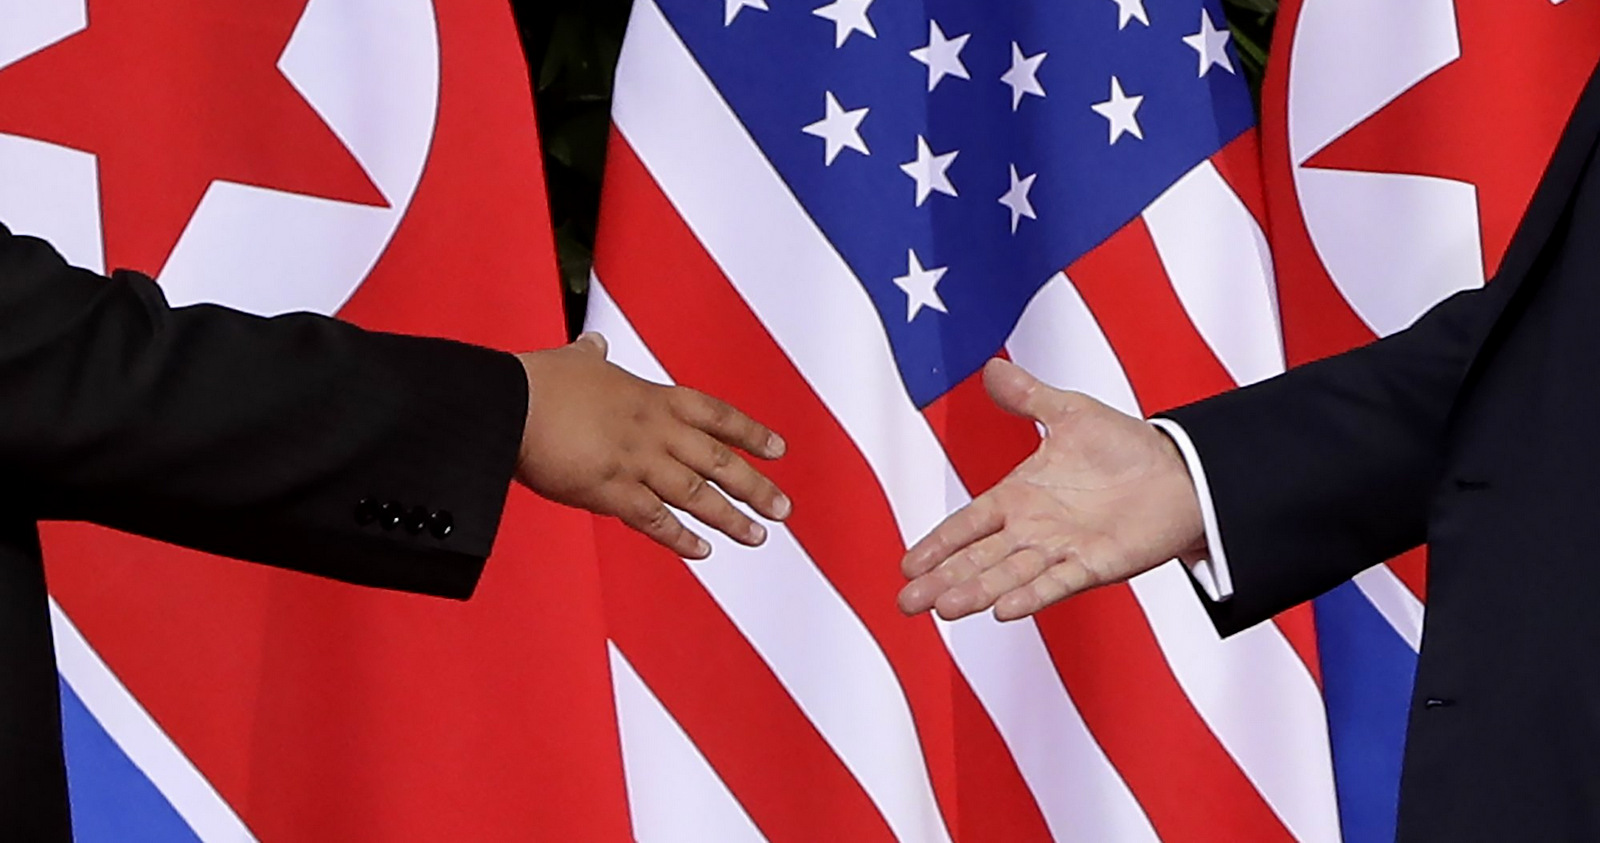 U.S. President Donald Trump, right, reaches to shakes hands with North Korea leader Kim Jong Un at the Capella resort on Sentosa Island, June 12, 2018 in Singapore. Evan Vucci | AP